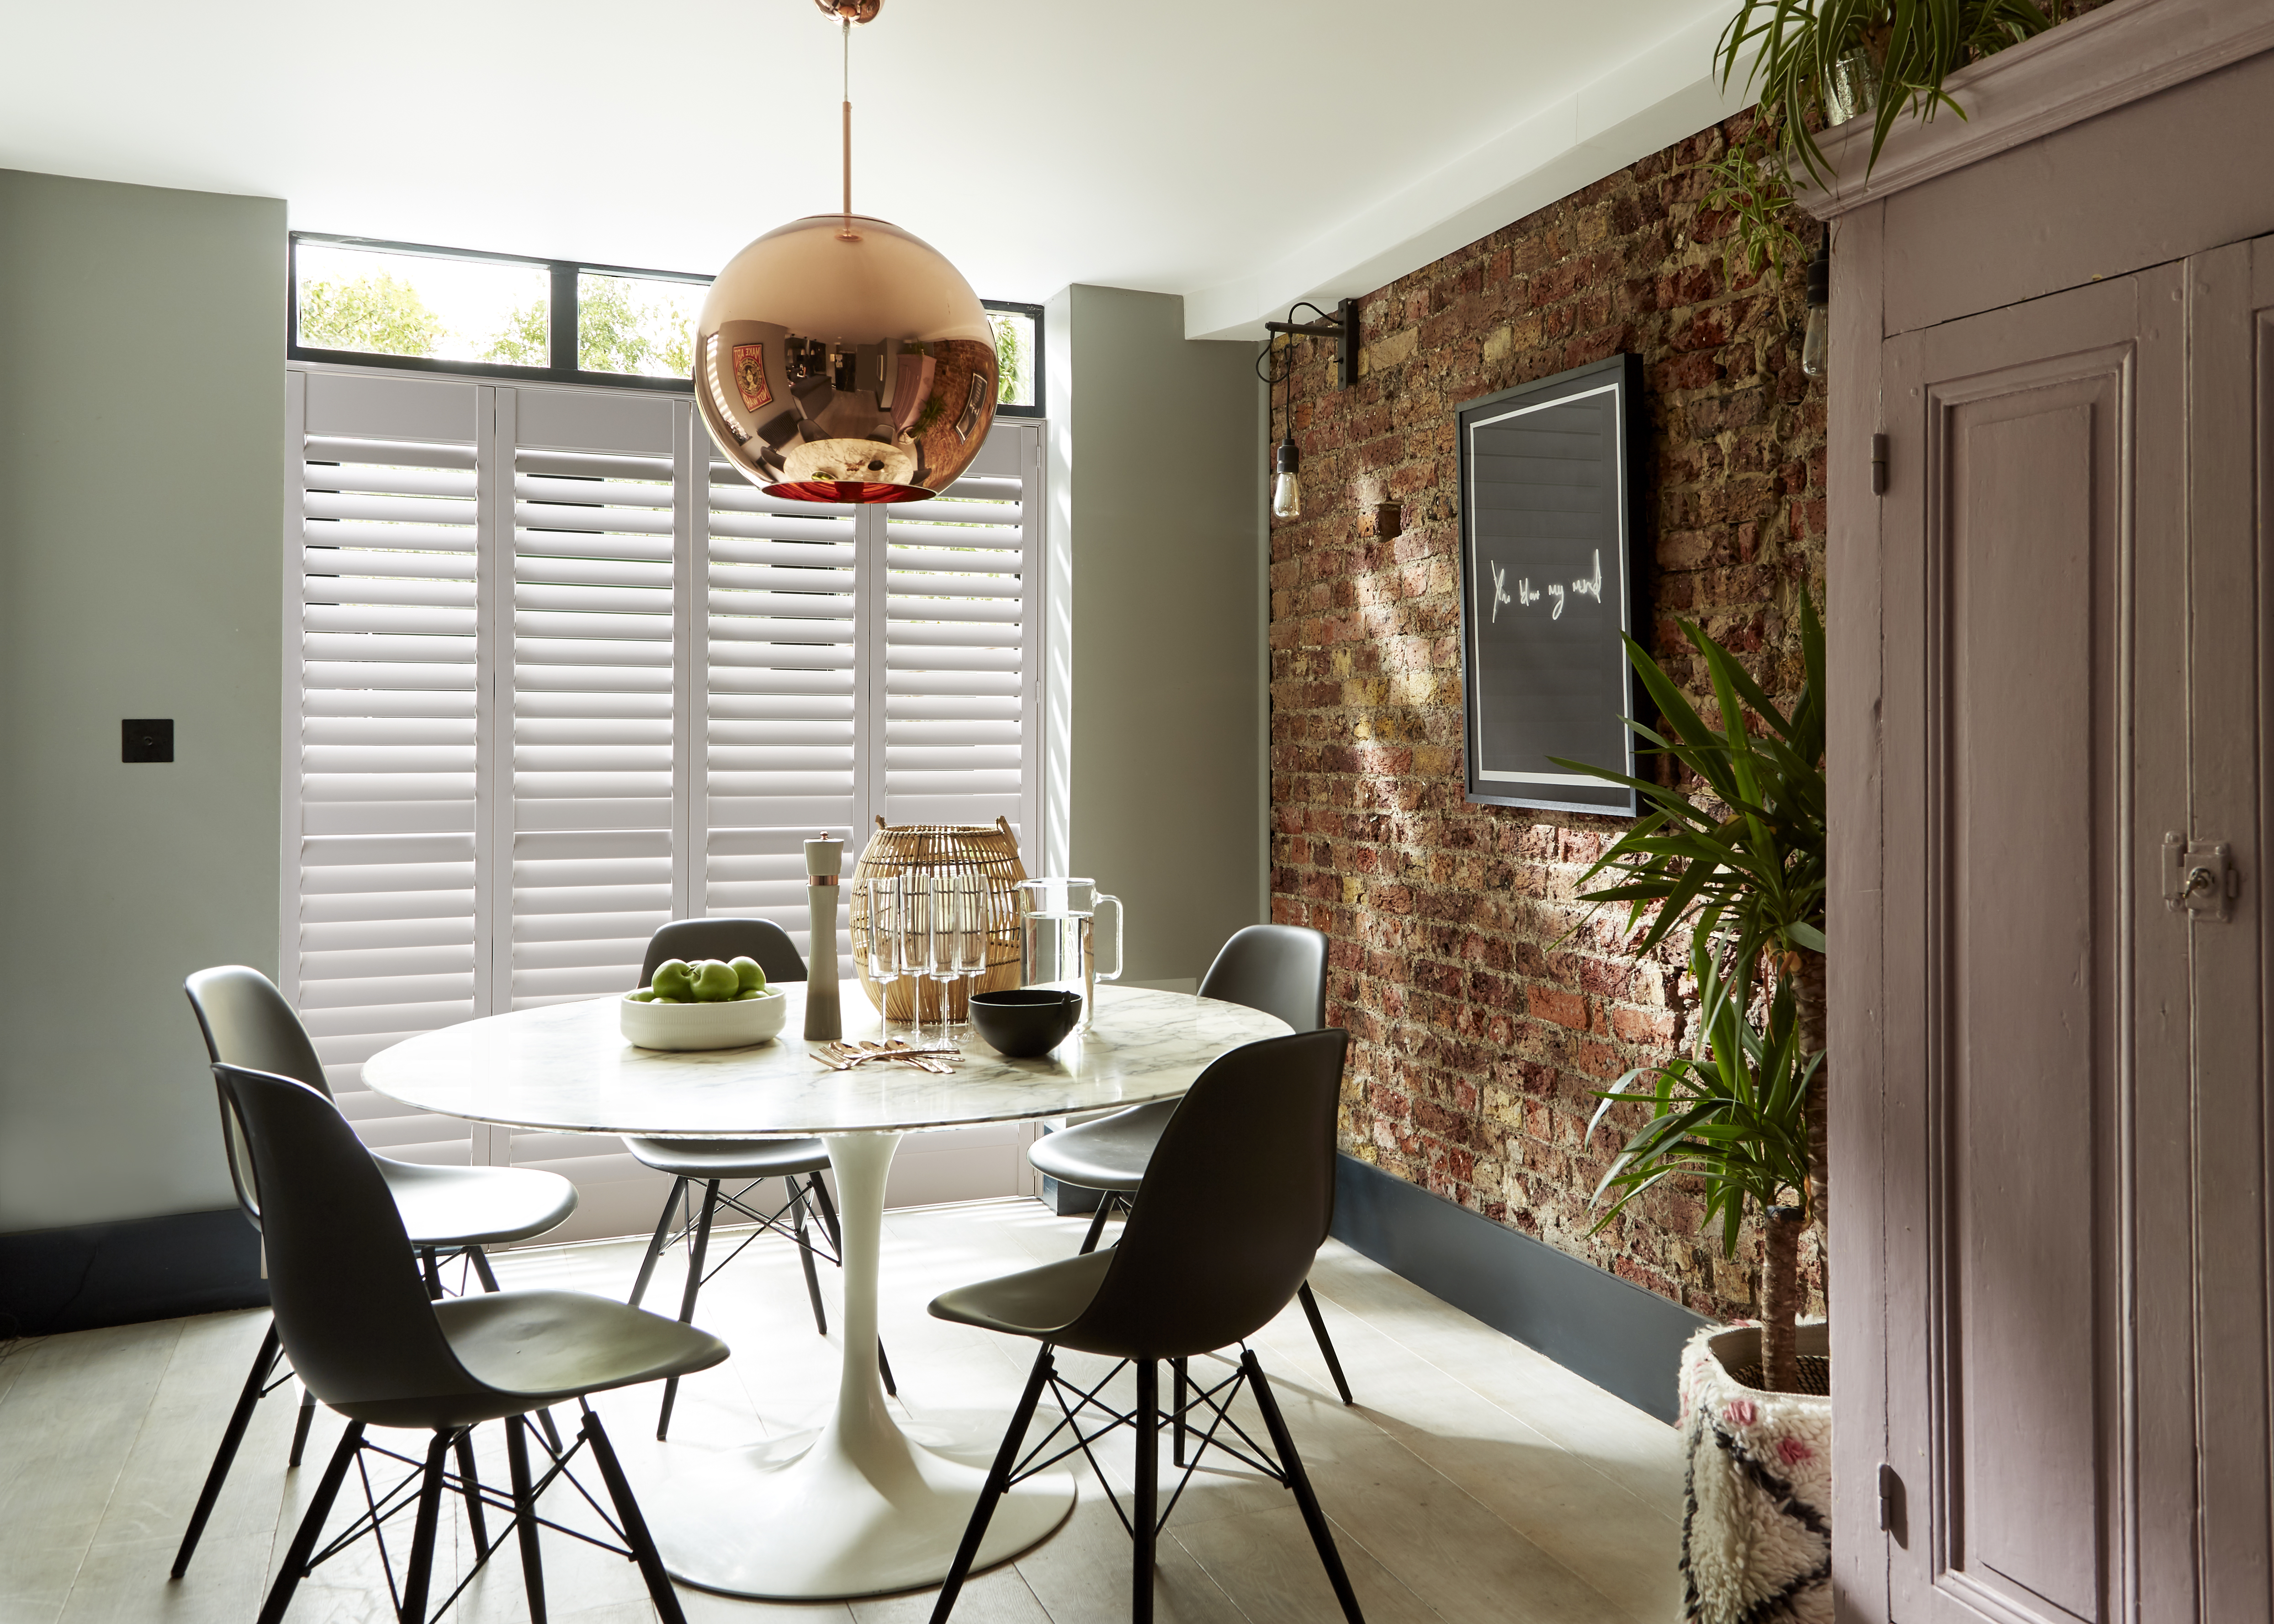 Cleveland MDF Shutters in a Dining Room